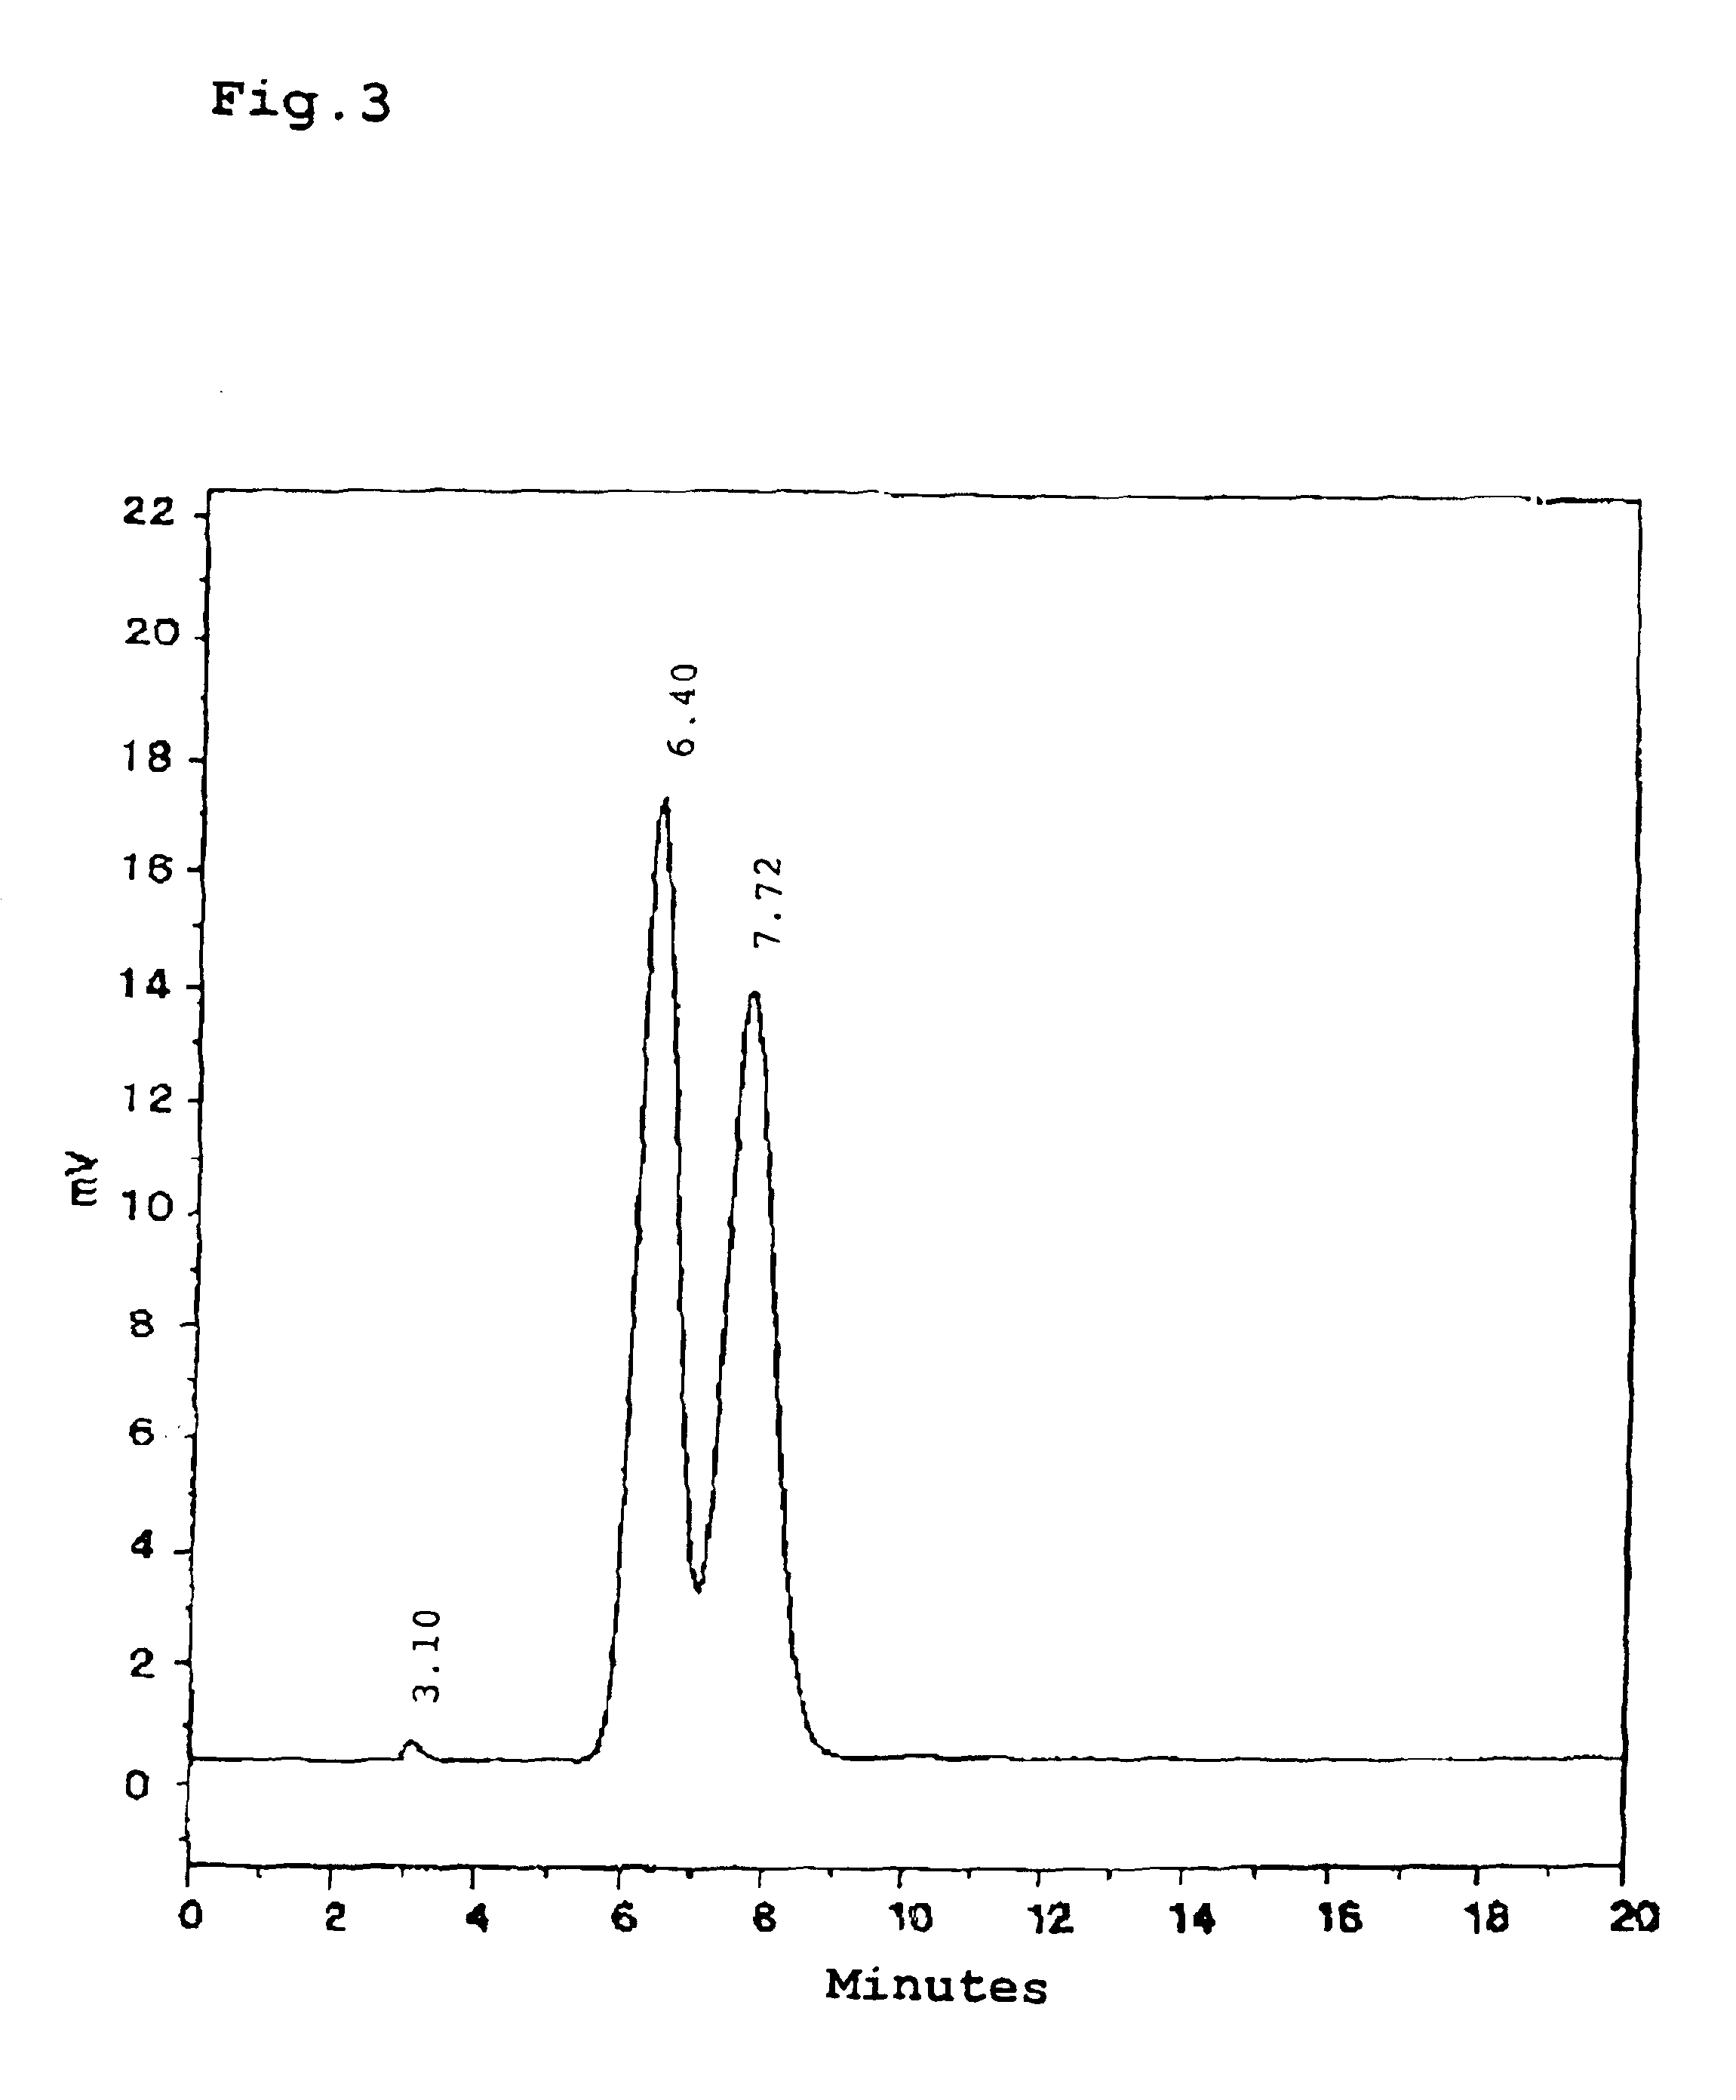 Process for producing optically active ethyl (3R, 5S, 6E)-7-[2-cycloproply-4-(4-fluorophenyl)quinolin-3-yl]-3,5-dihydroxy-6-heptenoate